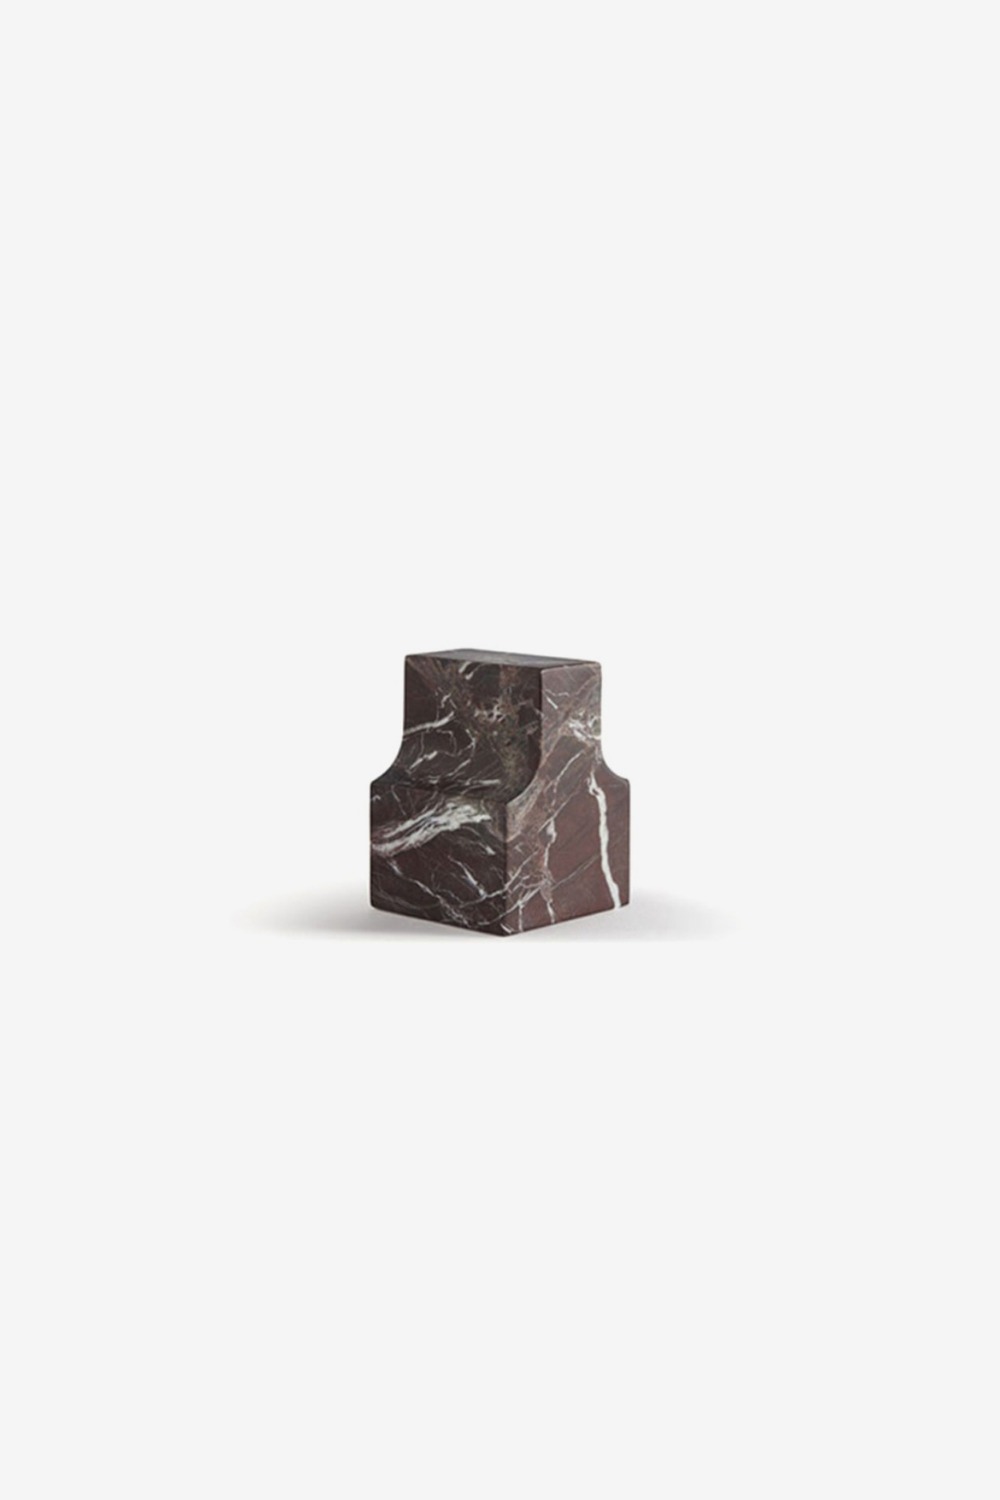 [Atipico] Classico Marble Paperweight / redbrown